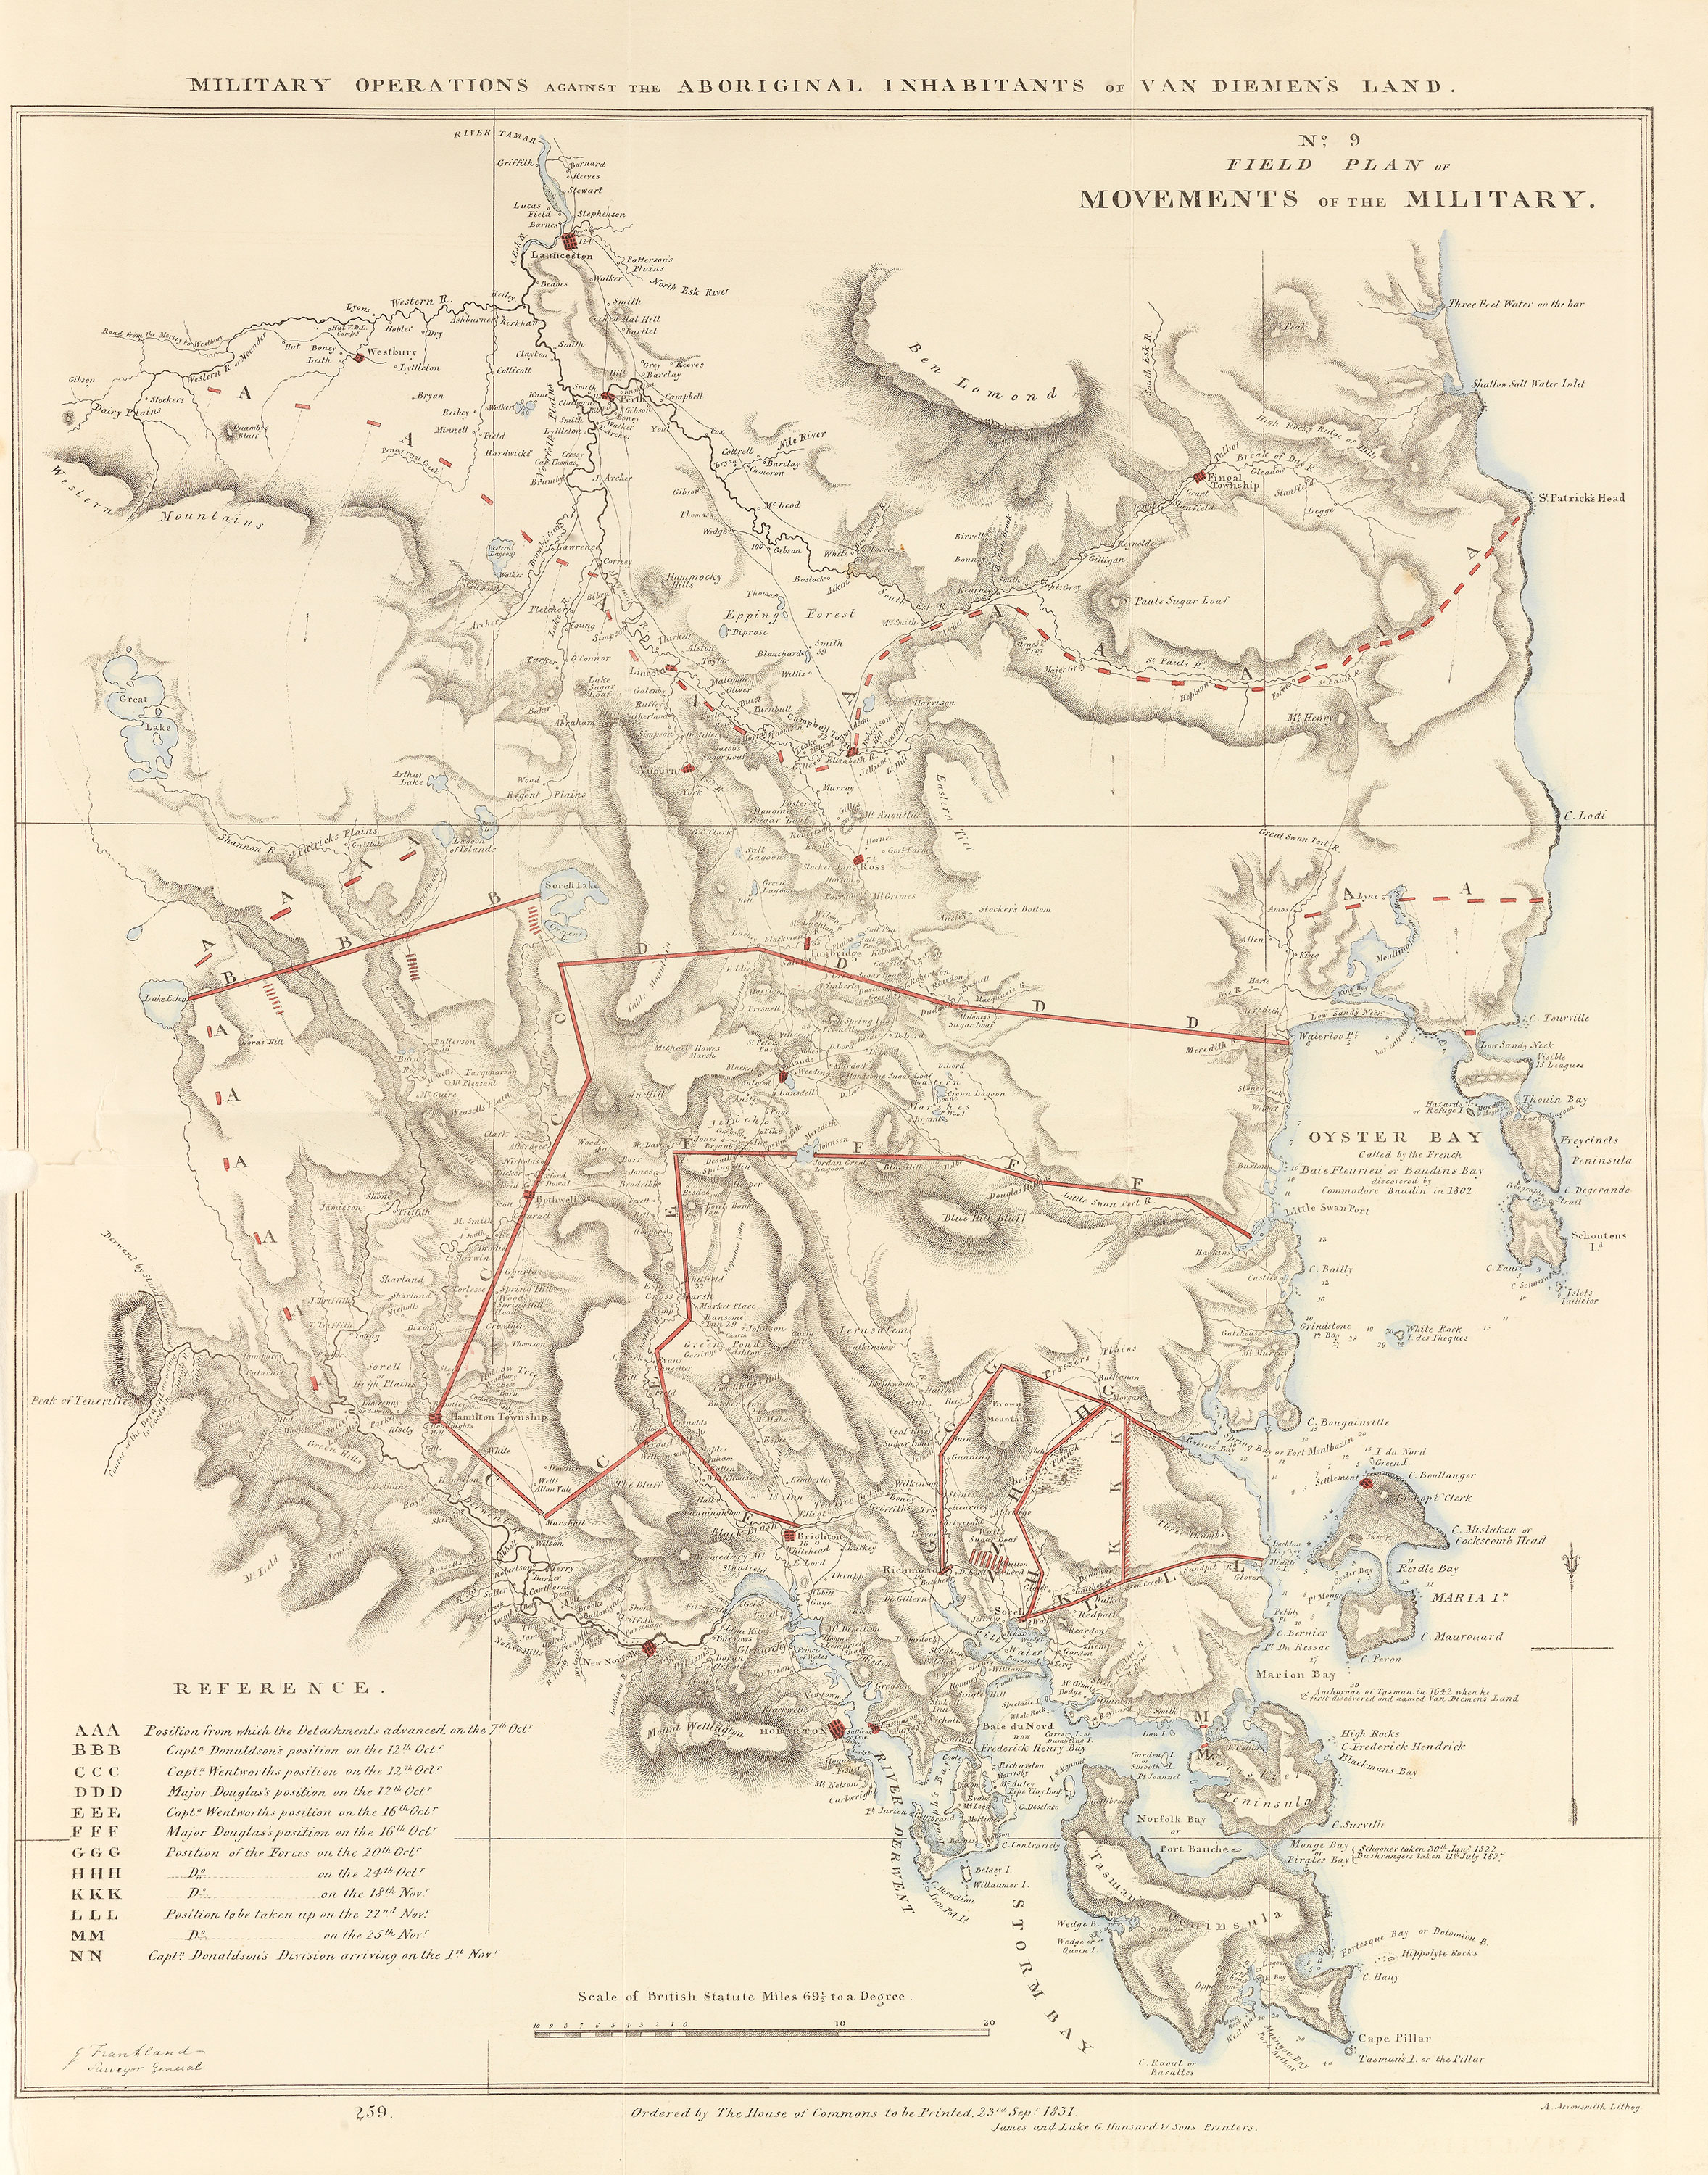 Map showing movements of the Black Line, 1831
